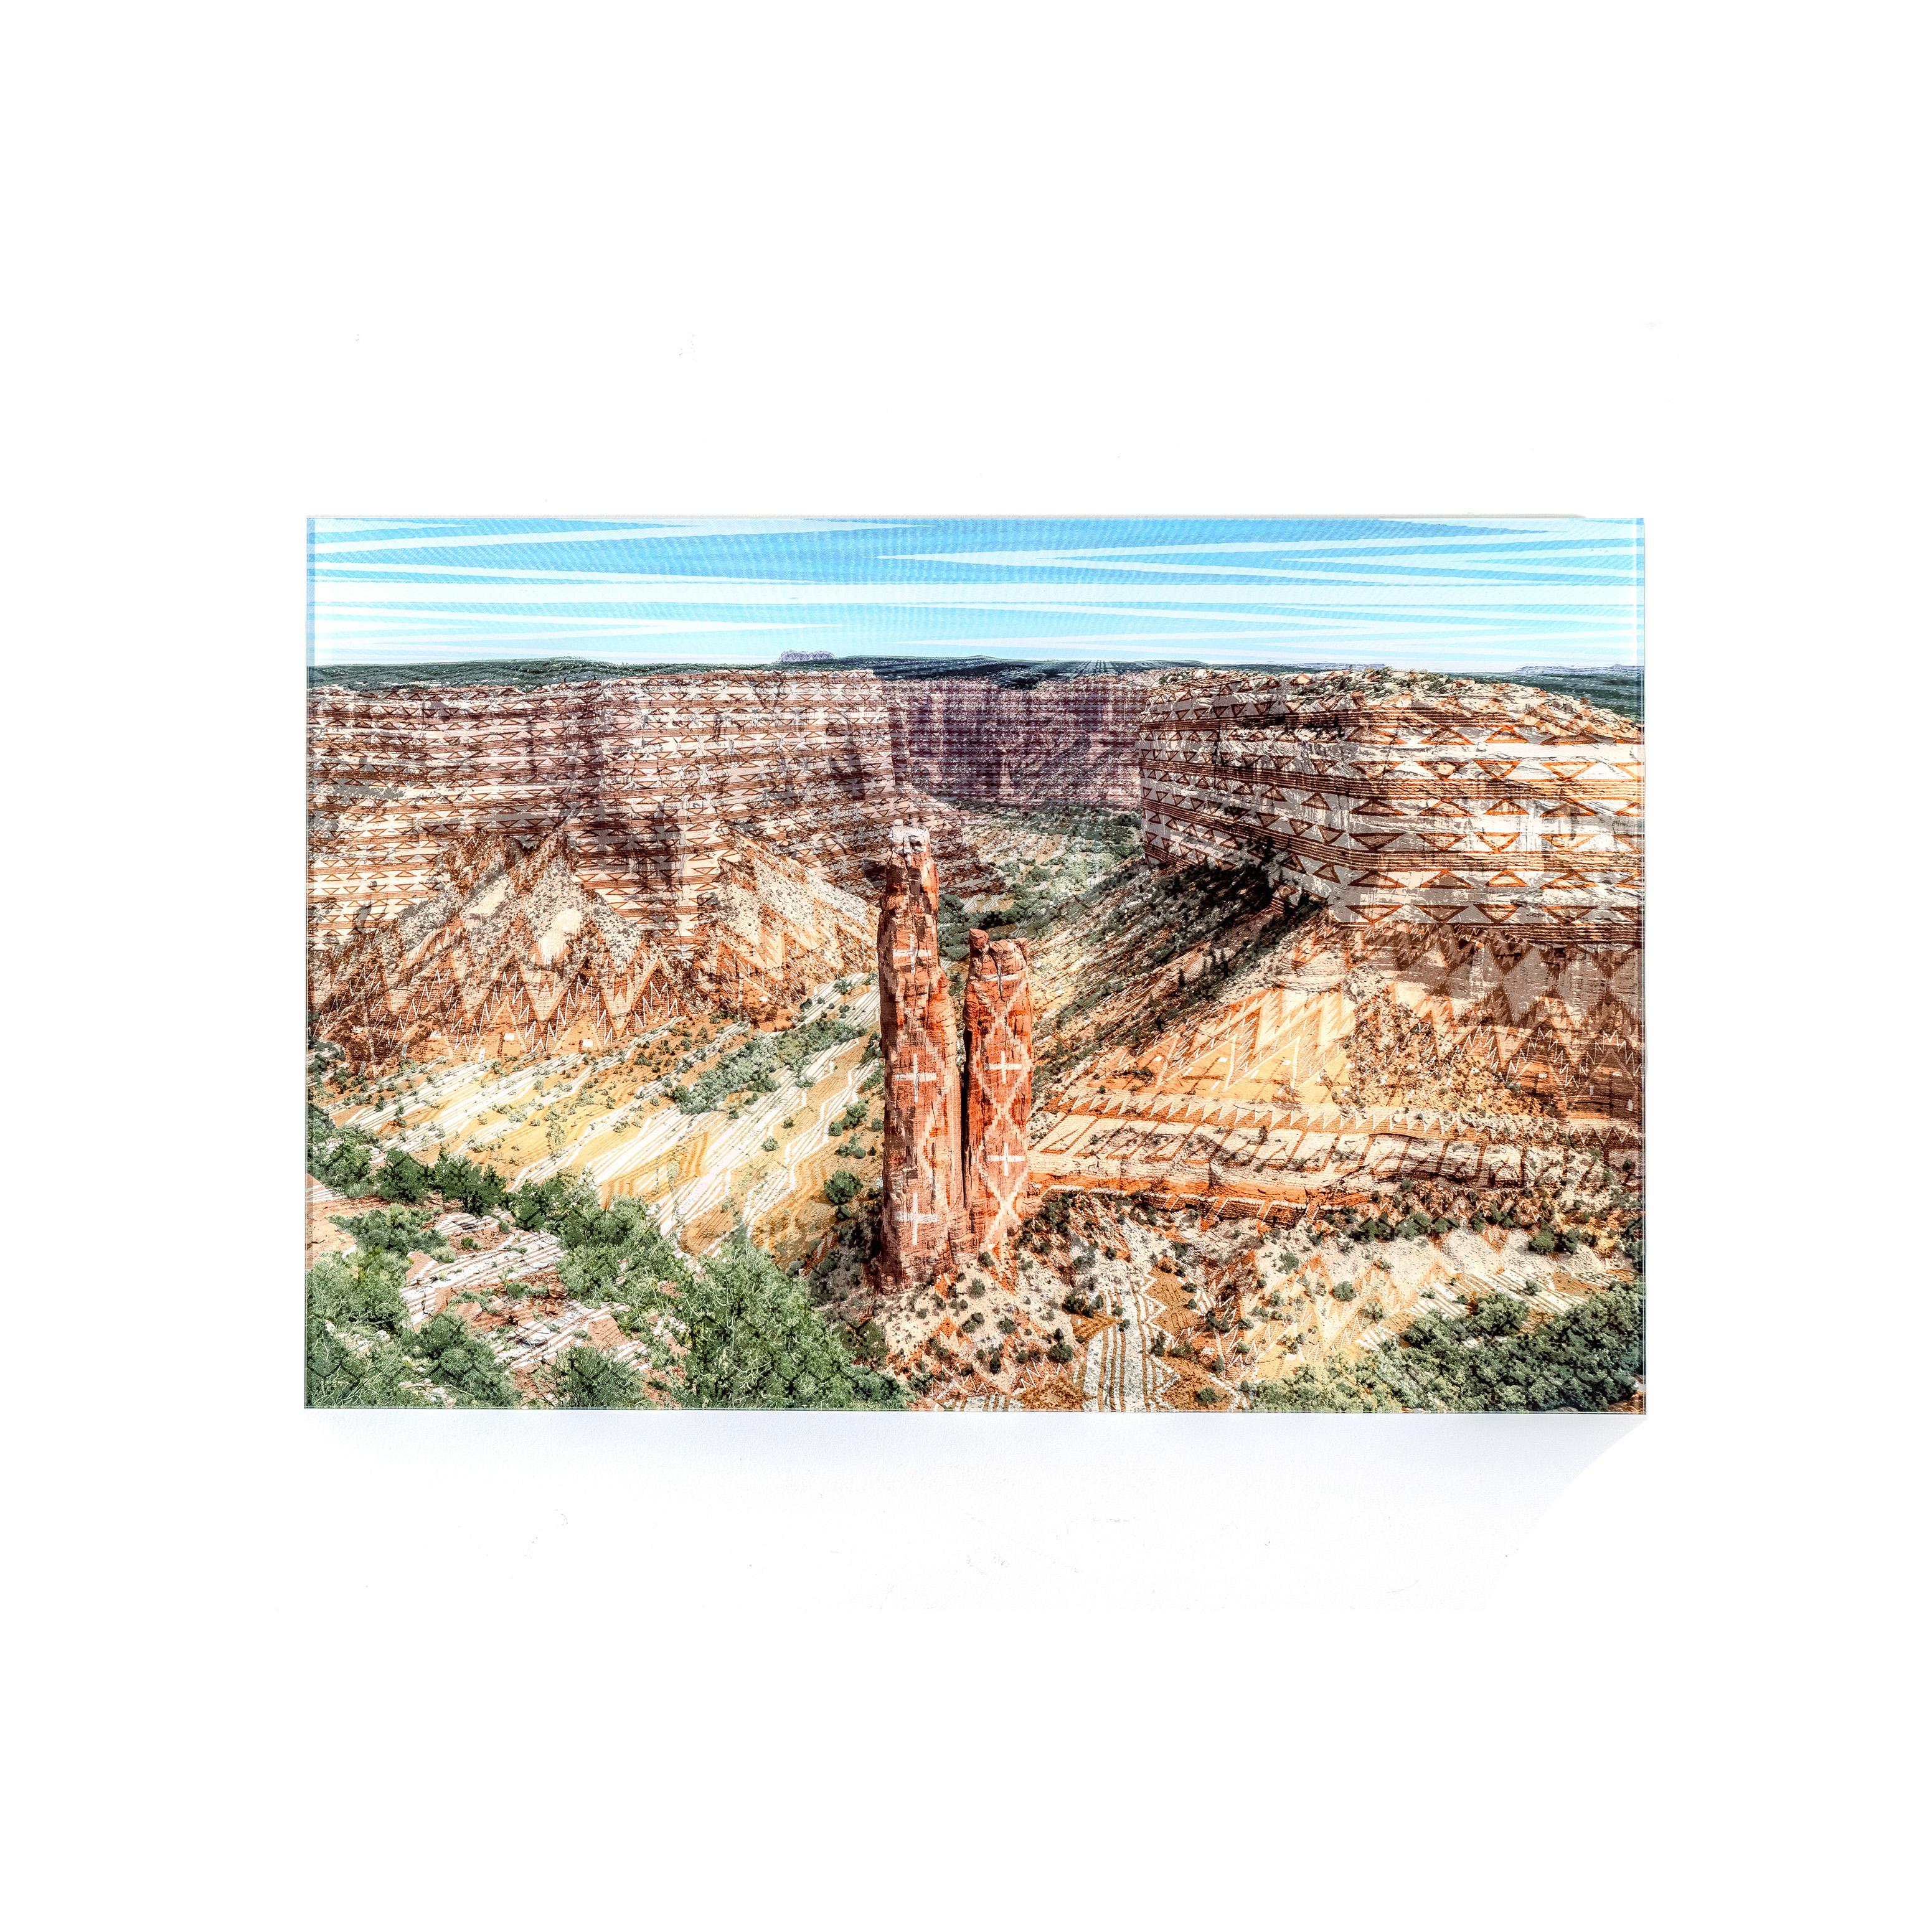 Woven Landscape: Canyon de Chelly - Mixed Media Art by Darby Raymond-Overstreet